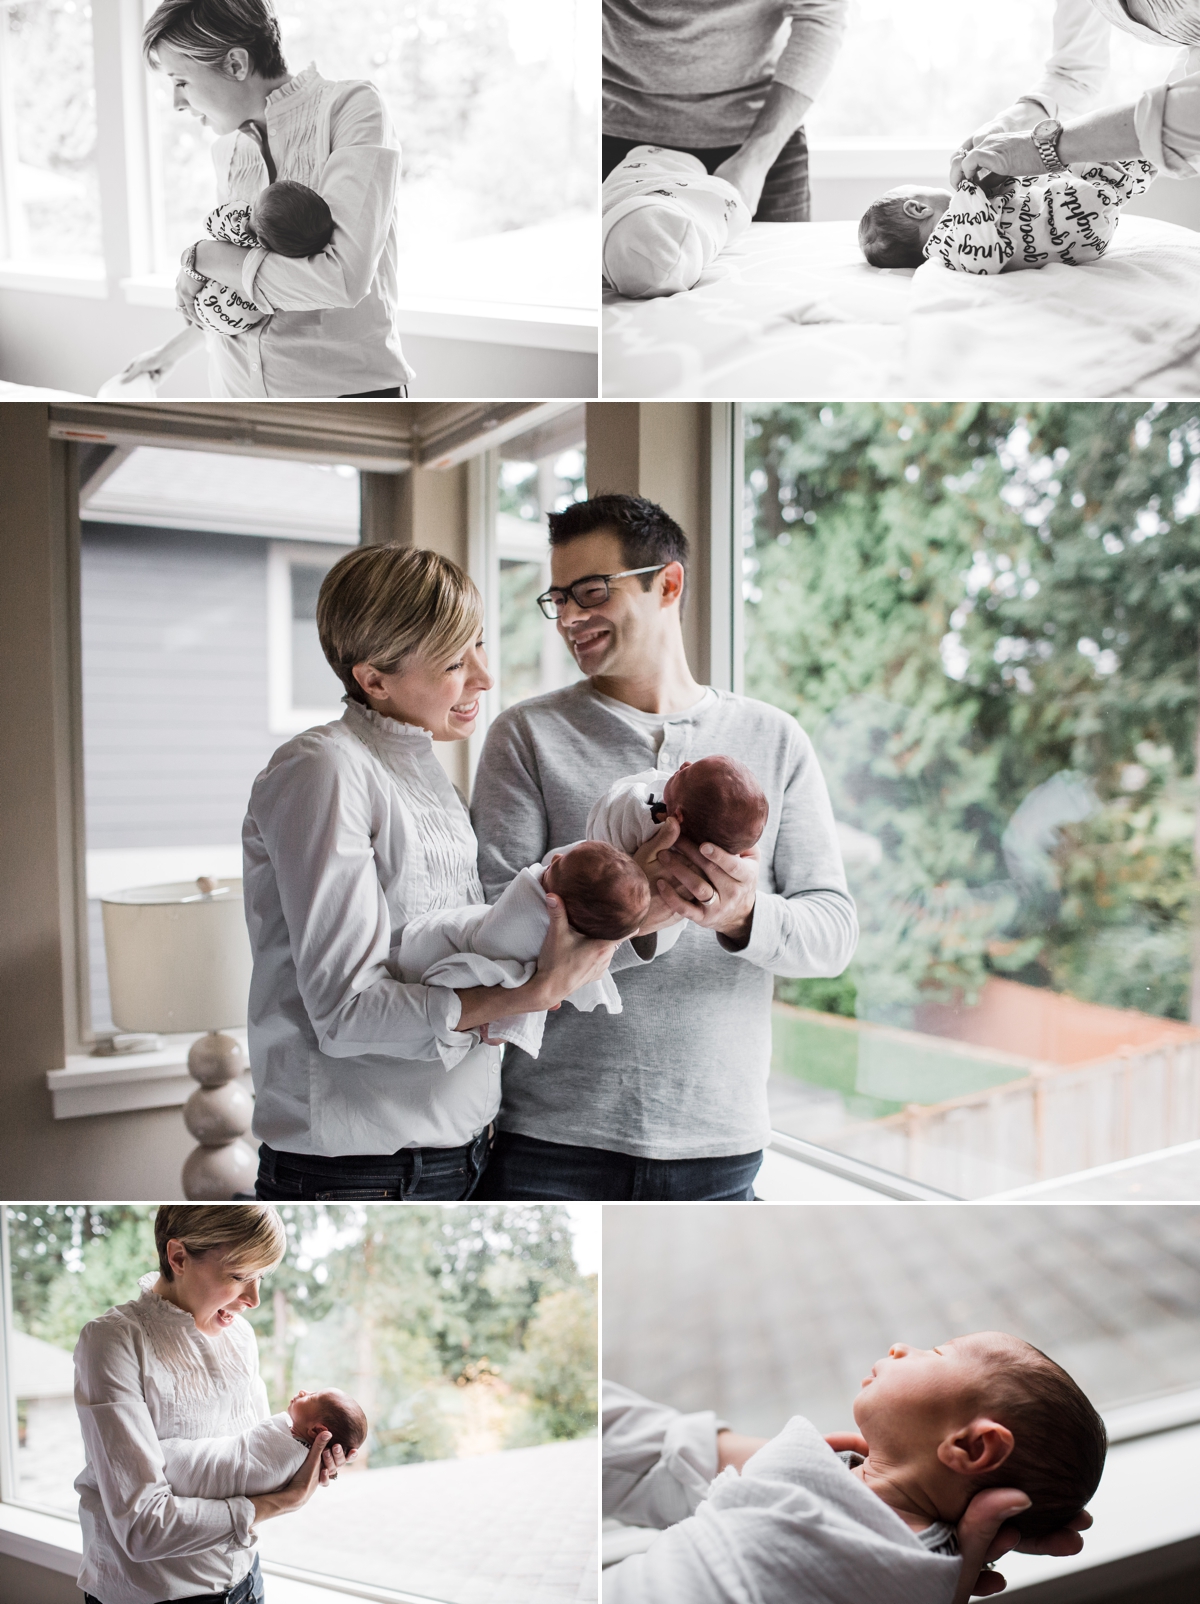 Seattle Newborn Photographer Elena S Blair | Connected and Emotive Family Photography | Twin boys